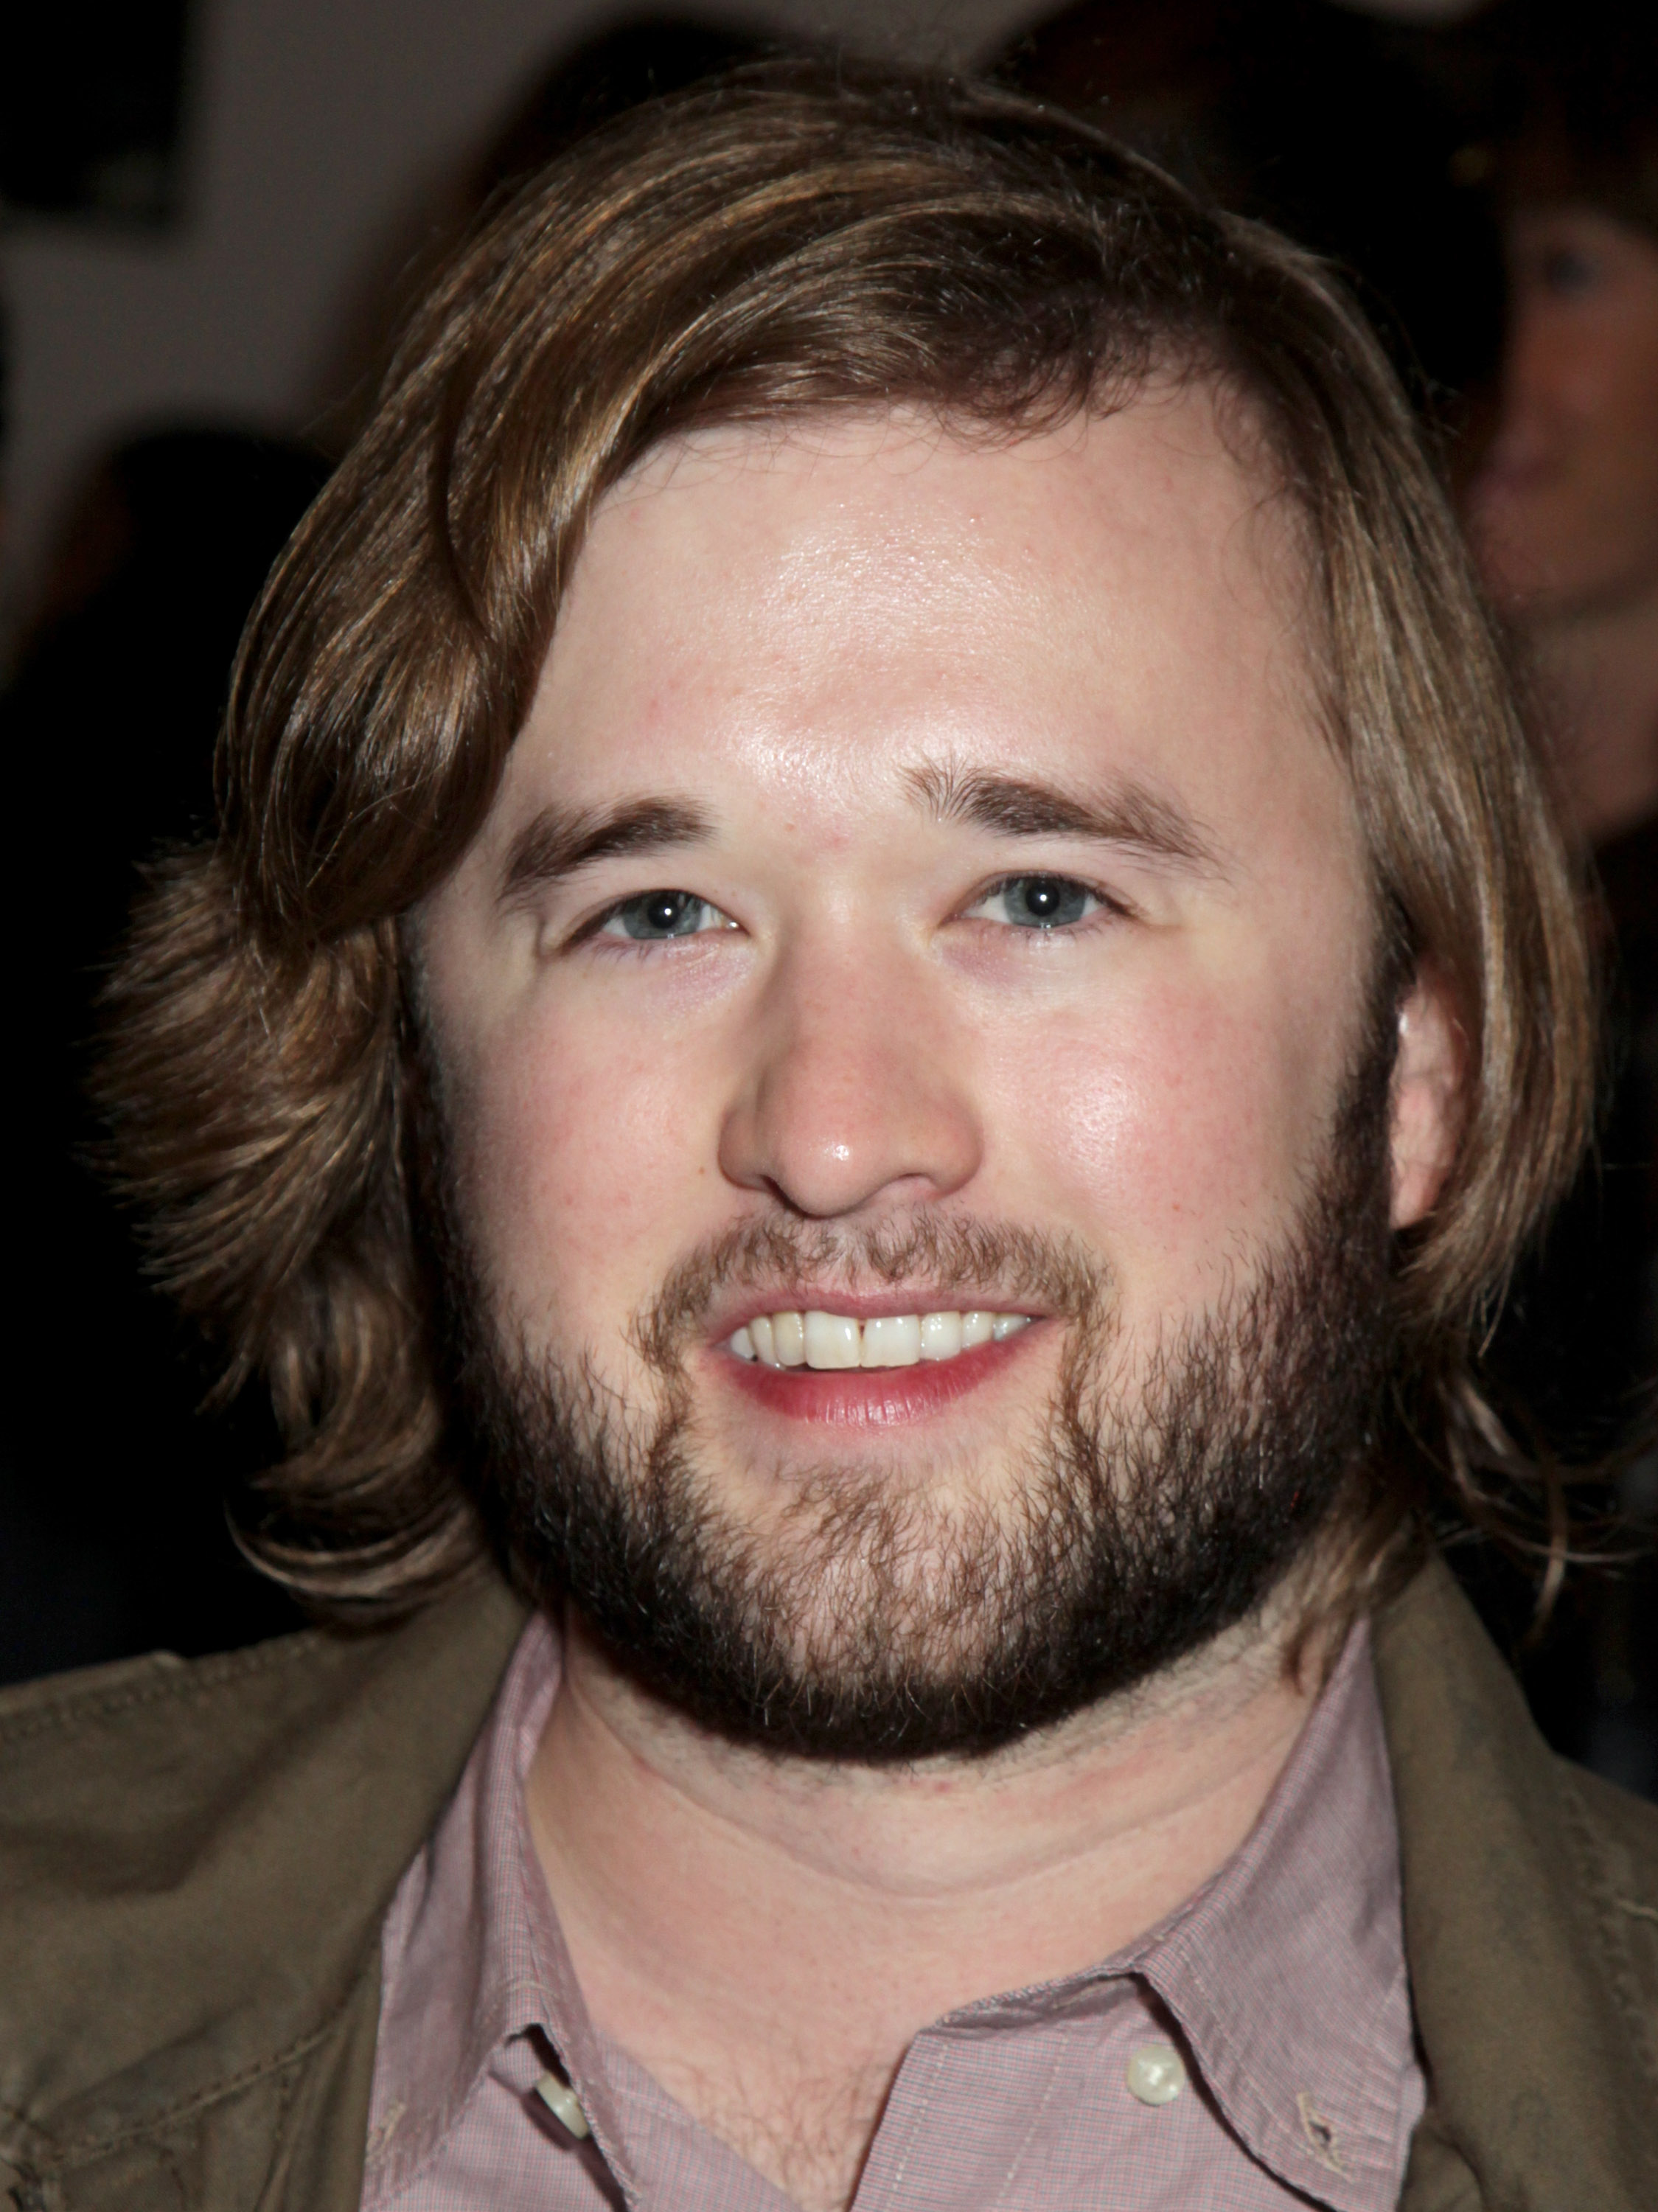 One fan wrote, 'Kendrick bodied. But one note. Joel Osteen & Haley Joel Osment are in fact two different people'